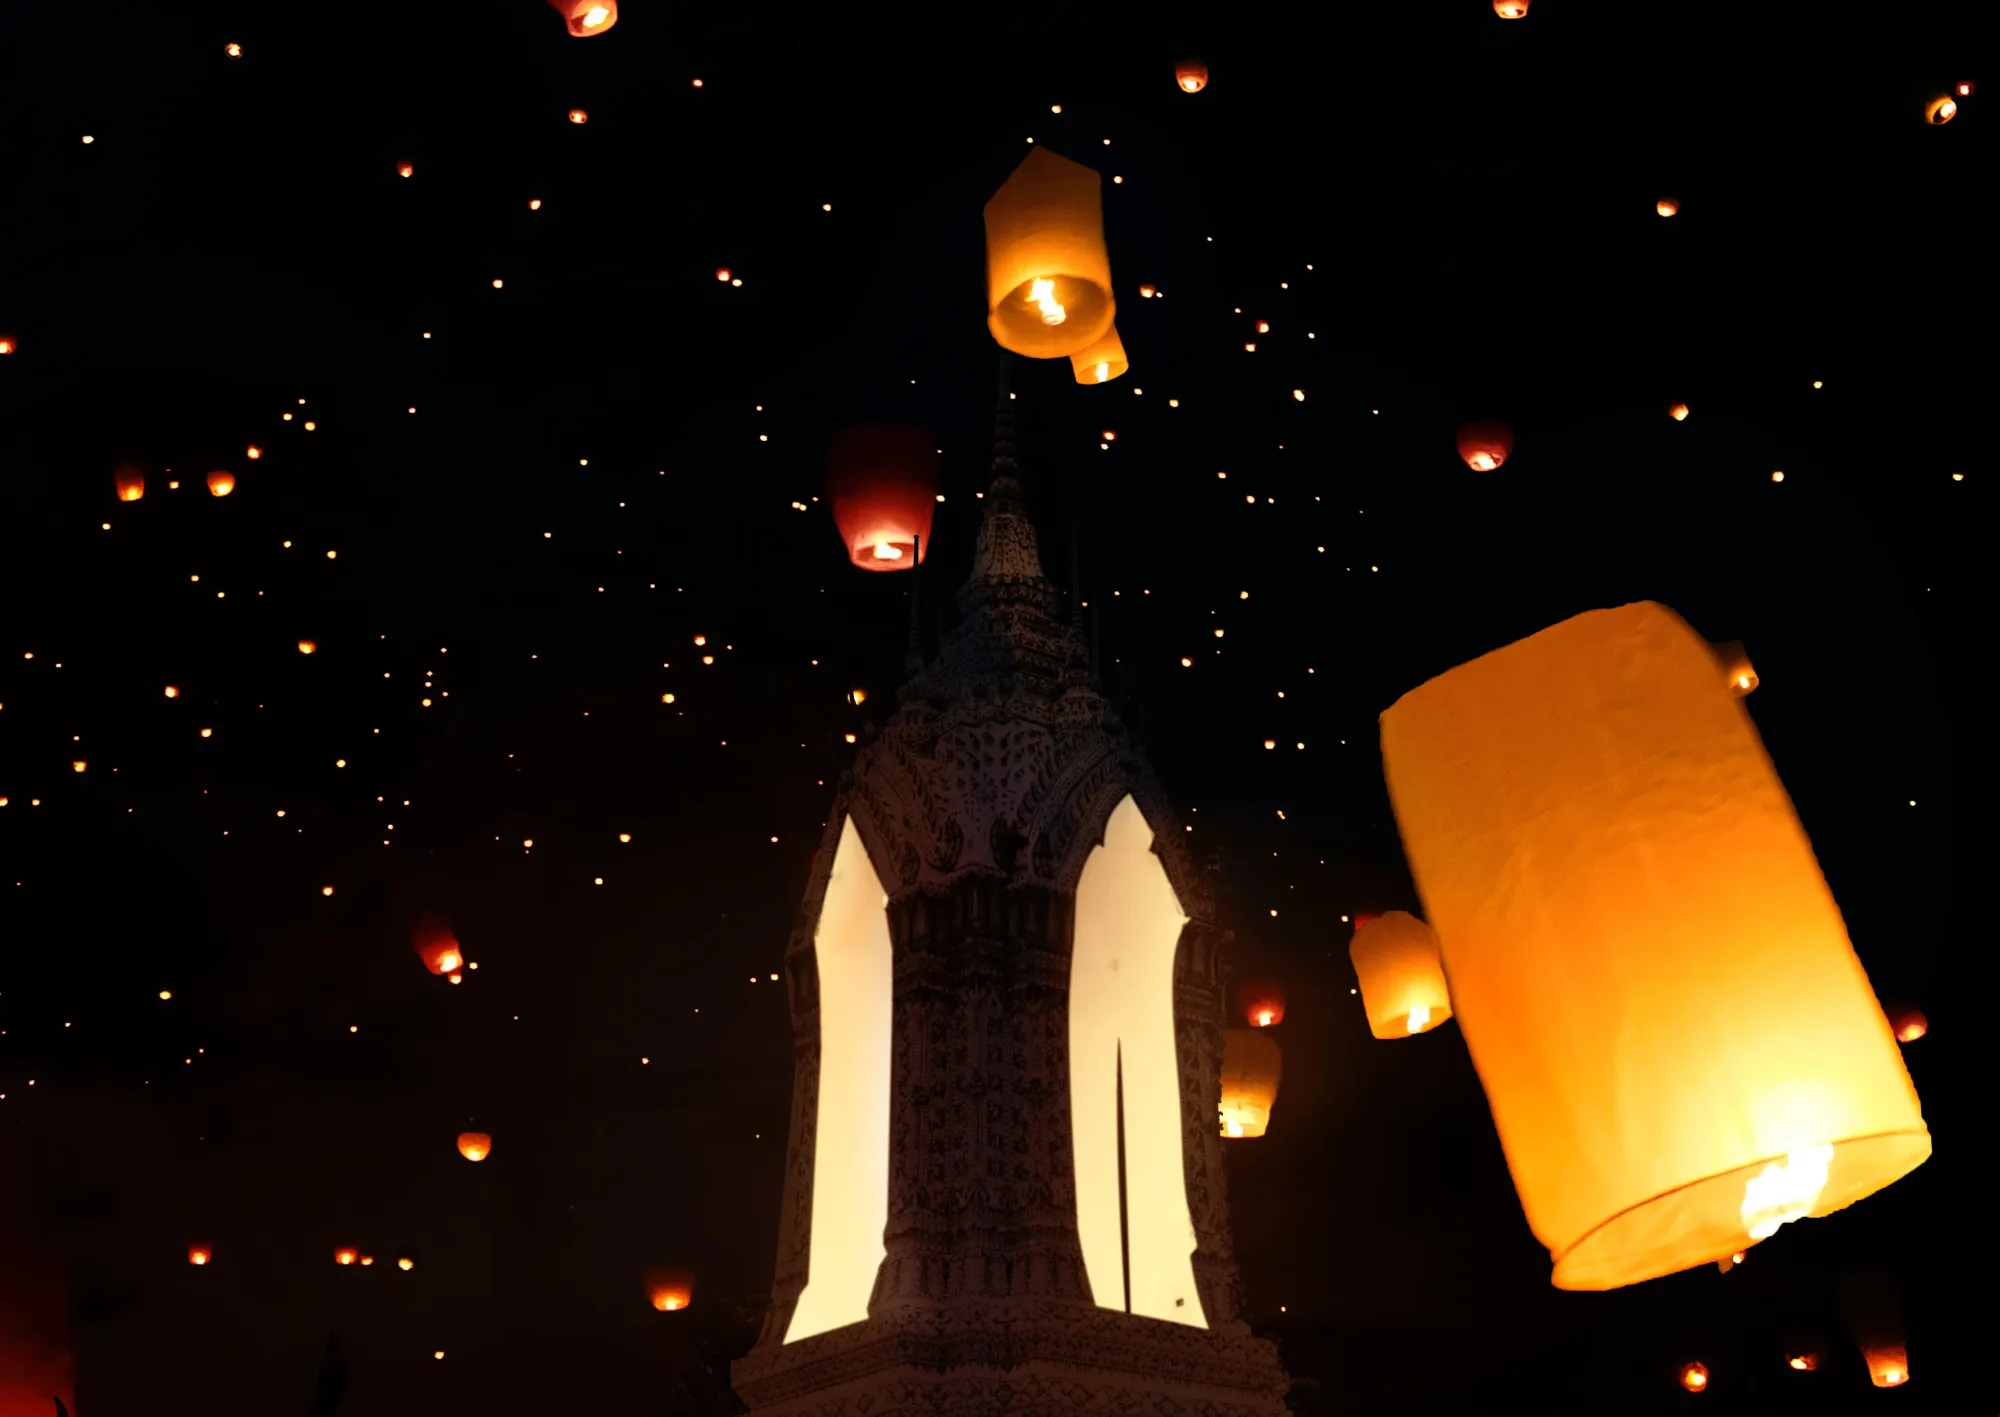 Image of the Lantern Festival in Thailand